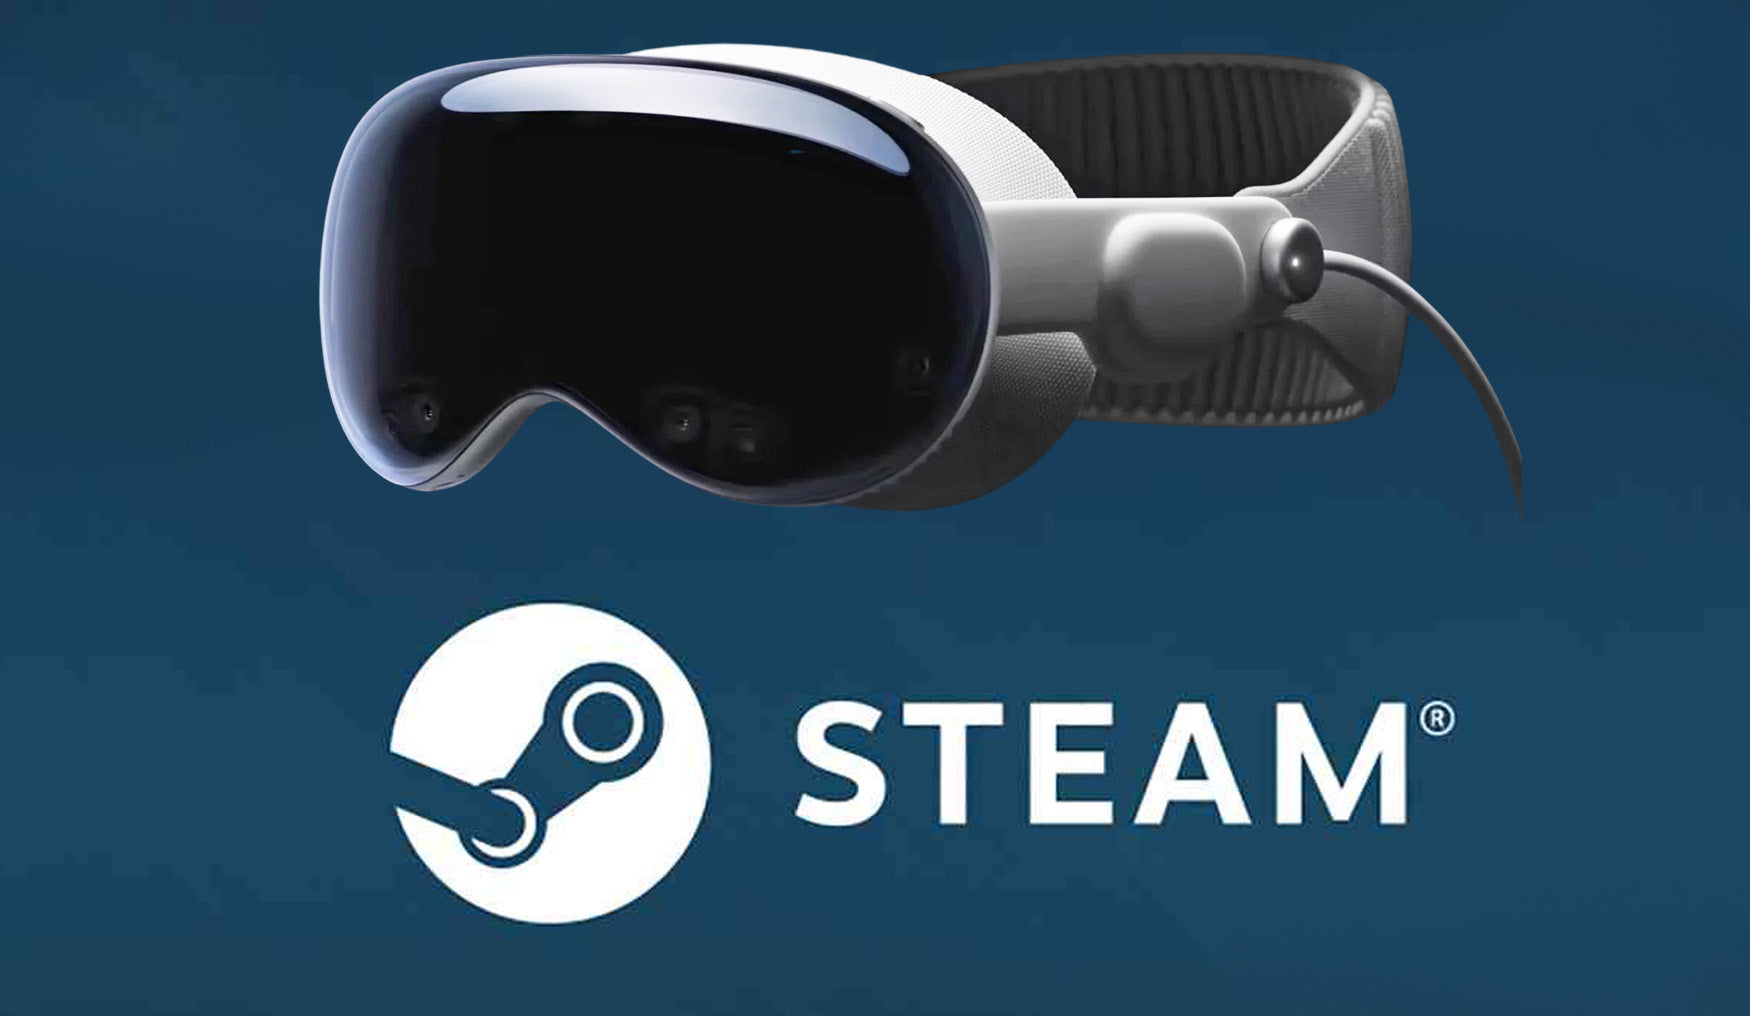 Can you use Steam VR on the Apple Vision Pro?